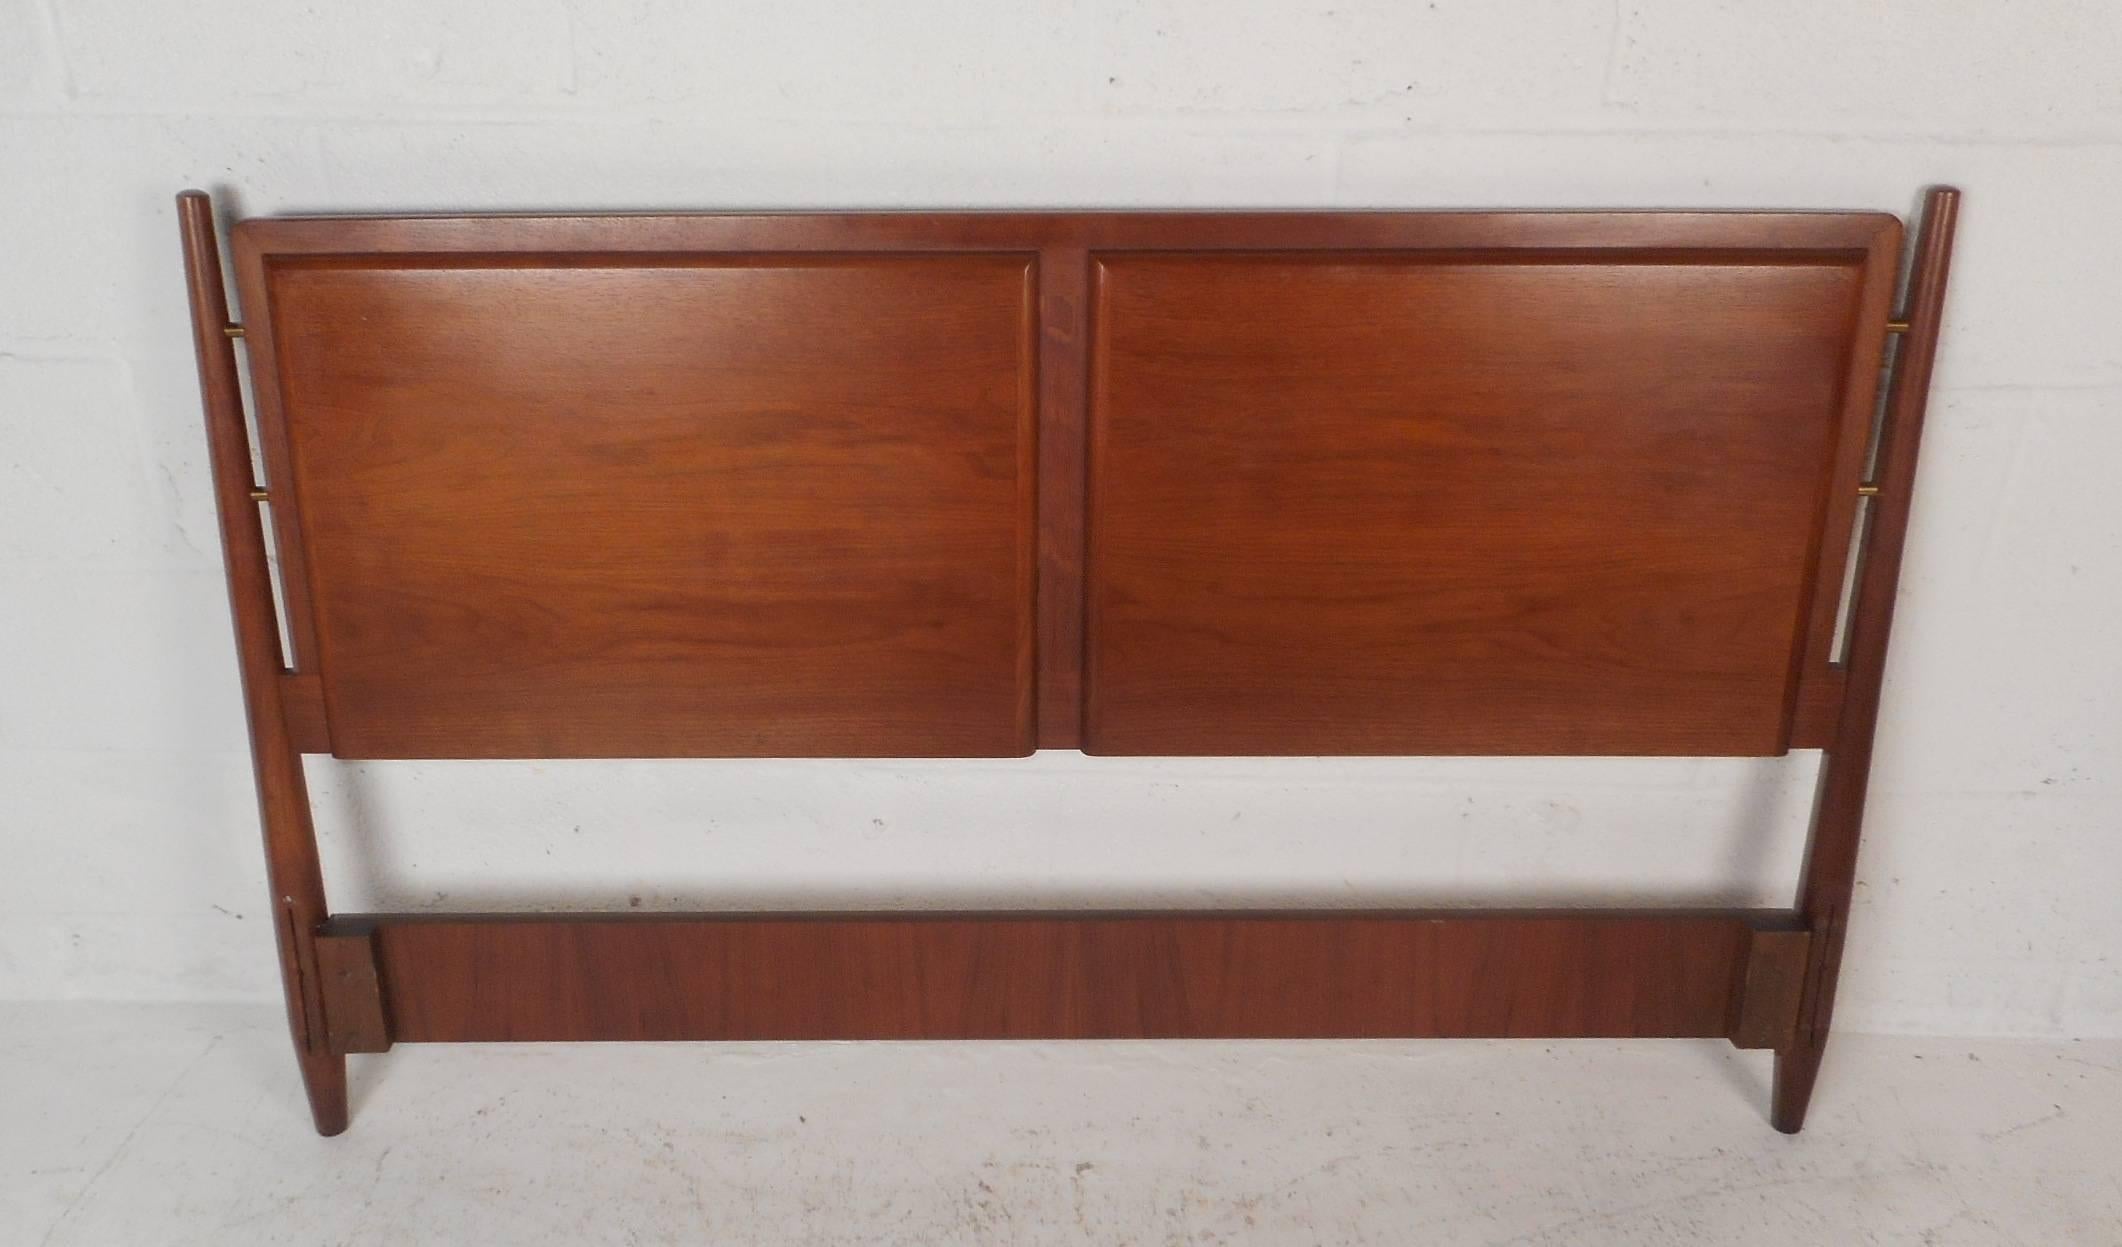 This stunning vintage modern full-size headboard features elegant walnut wood grain throughout. Embossed square sections above where your head lays add a unique quality. Two tapered cylindrical supports make this piece stand out. Please confirm item